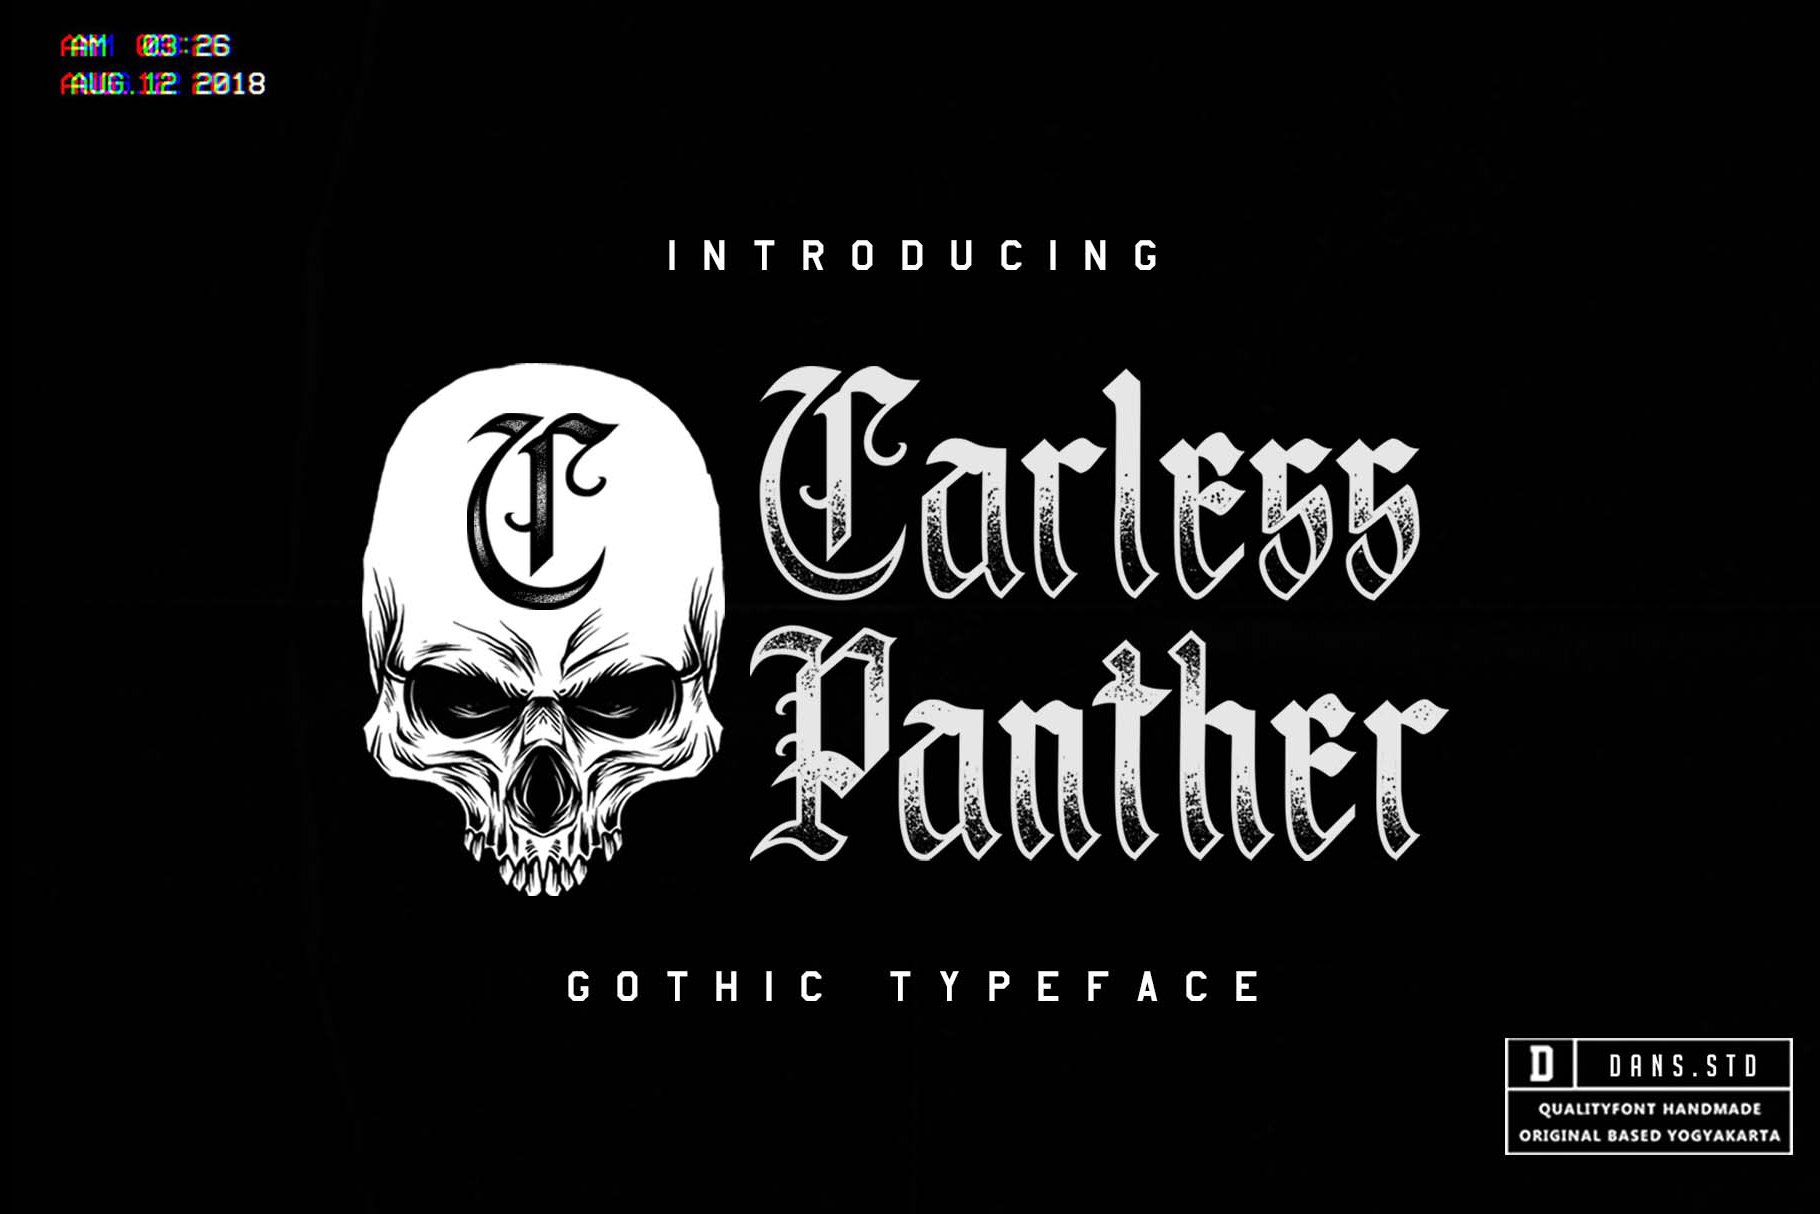 Carless Panther Blackletter (sale) cover image.